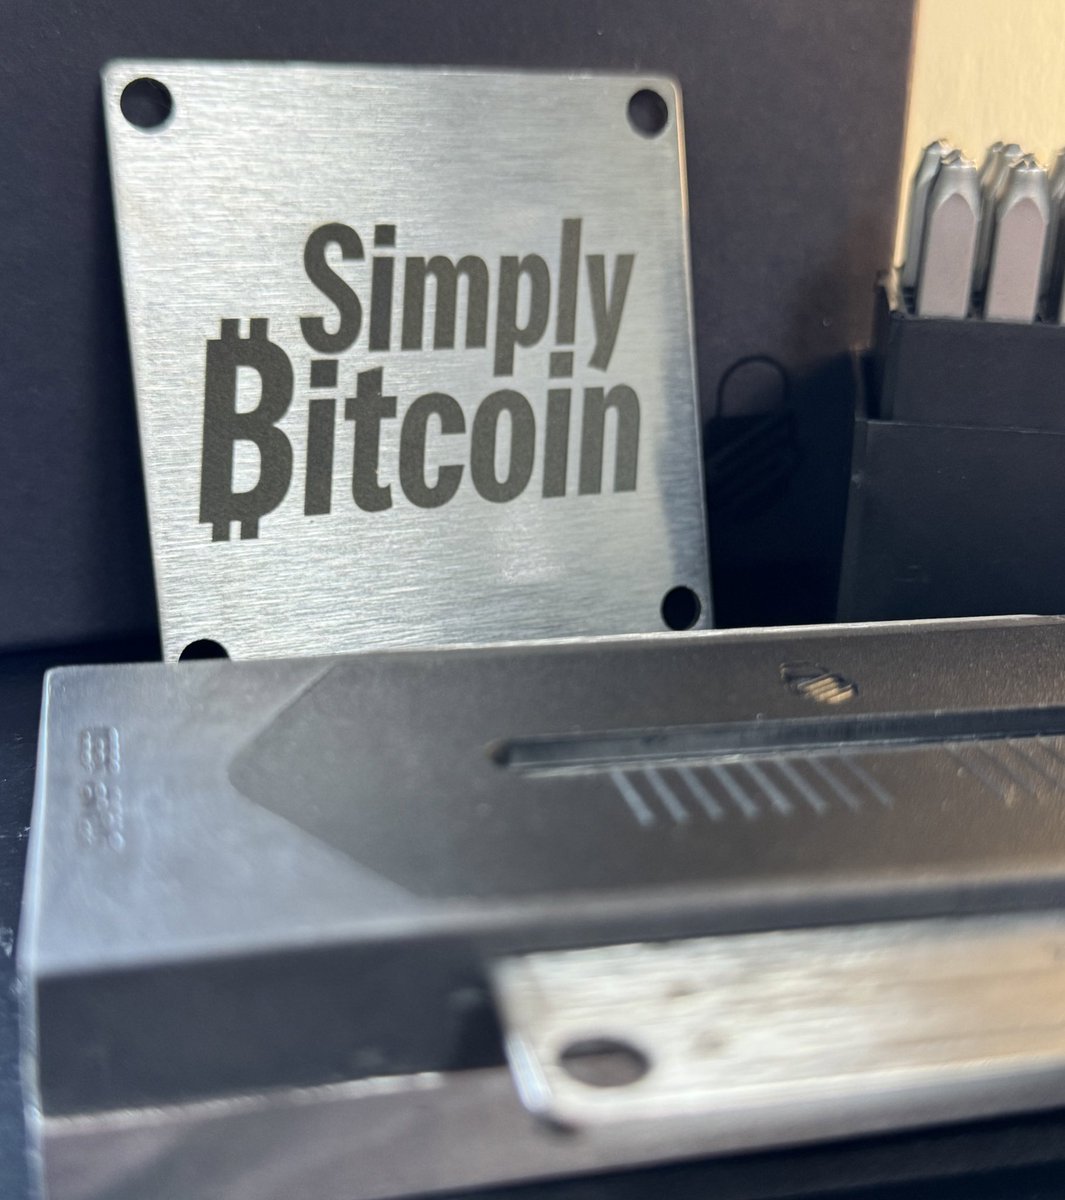 If you watch this live show 5x a week, we can be friends. @SimplyBitcoinTV Bonus points if you know what this titanium plate is used for.